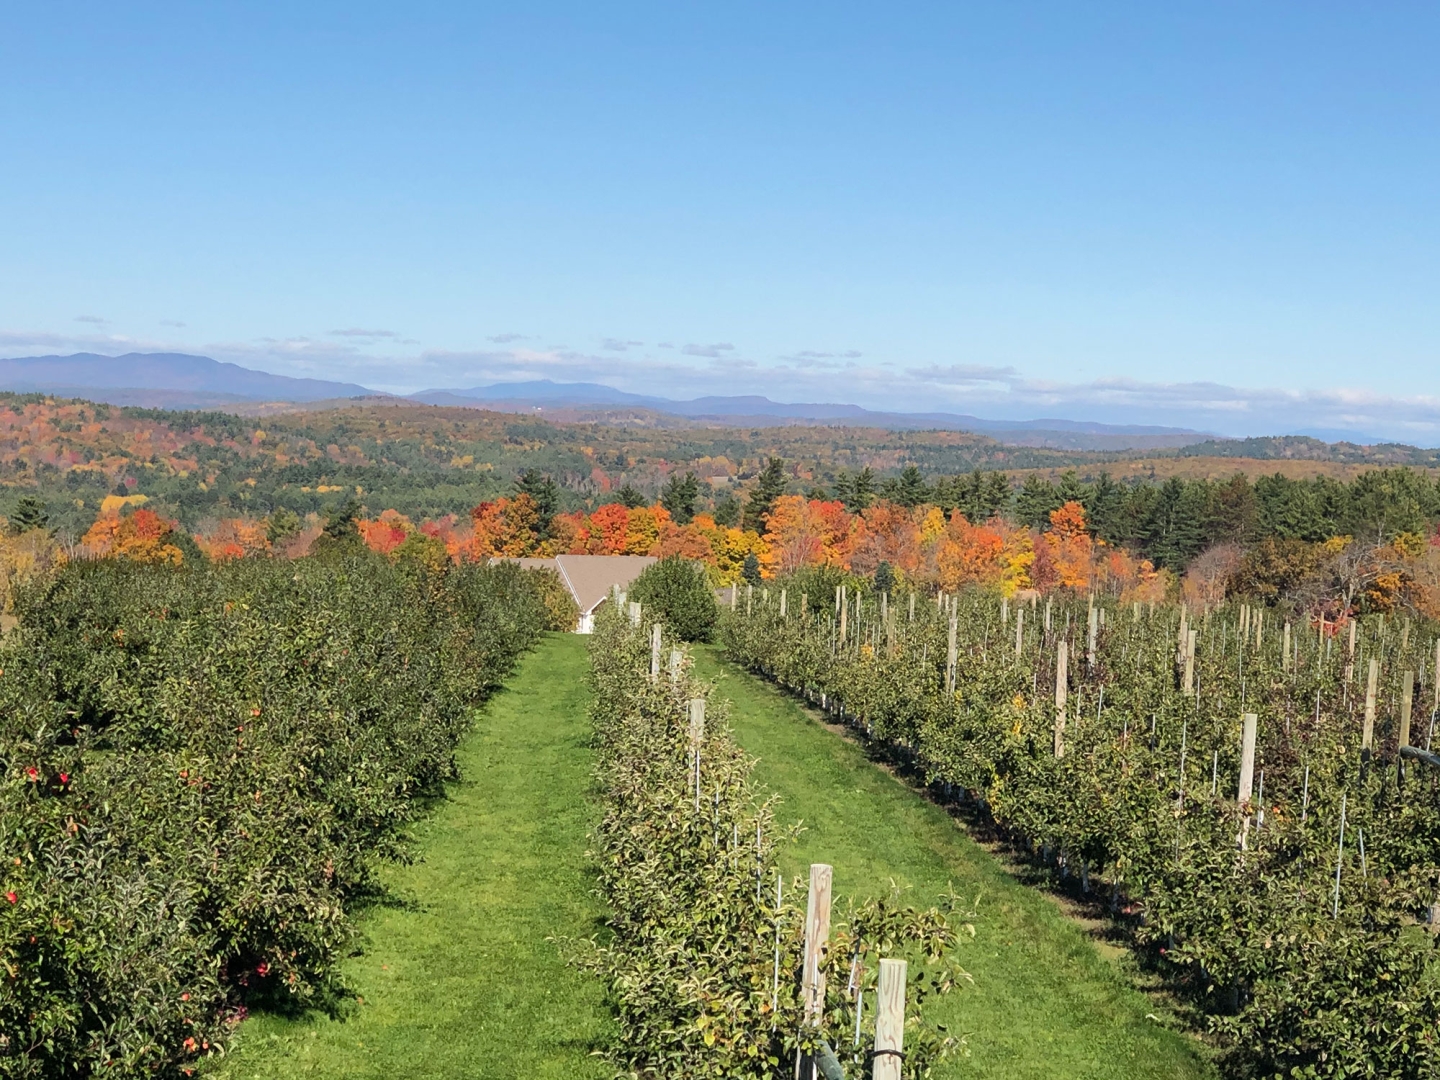 Carter Hill Orchard